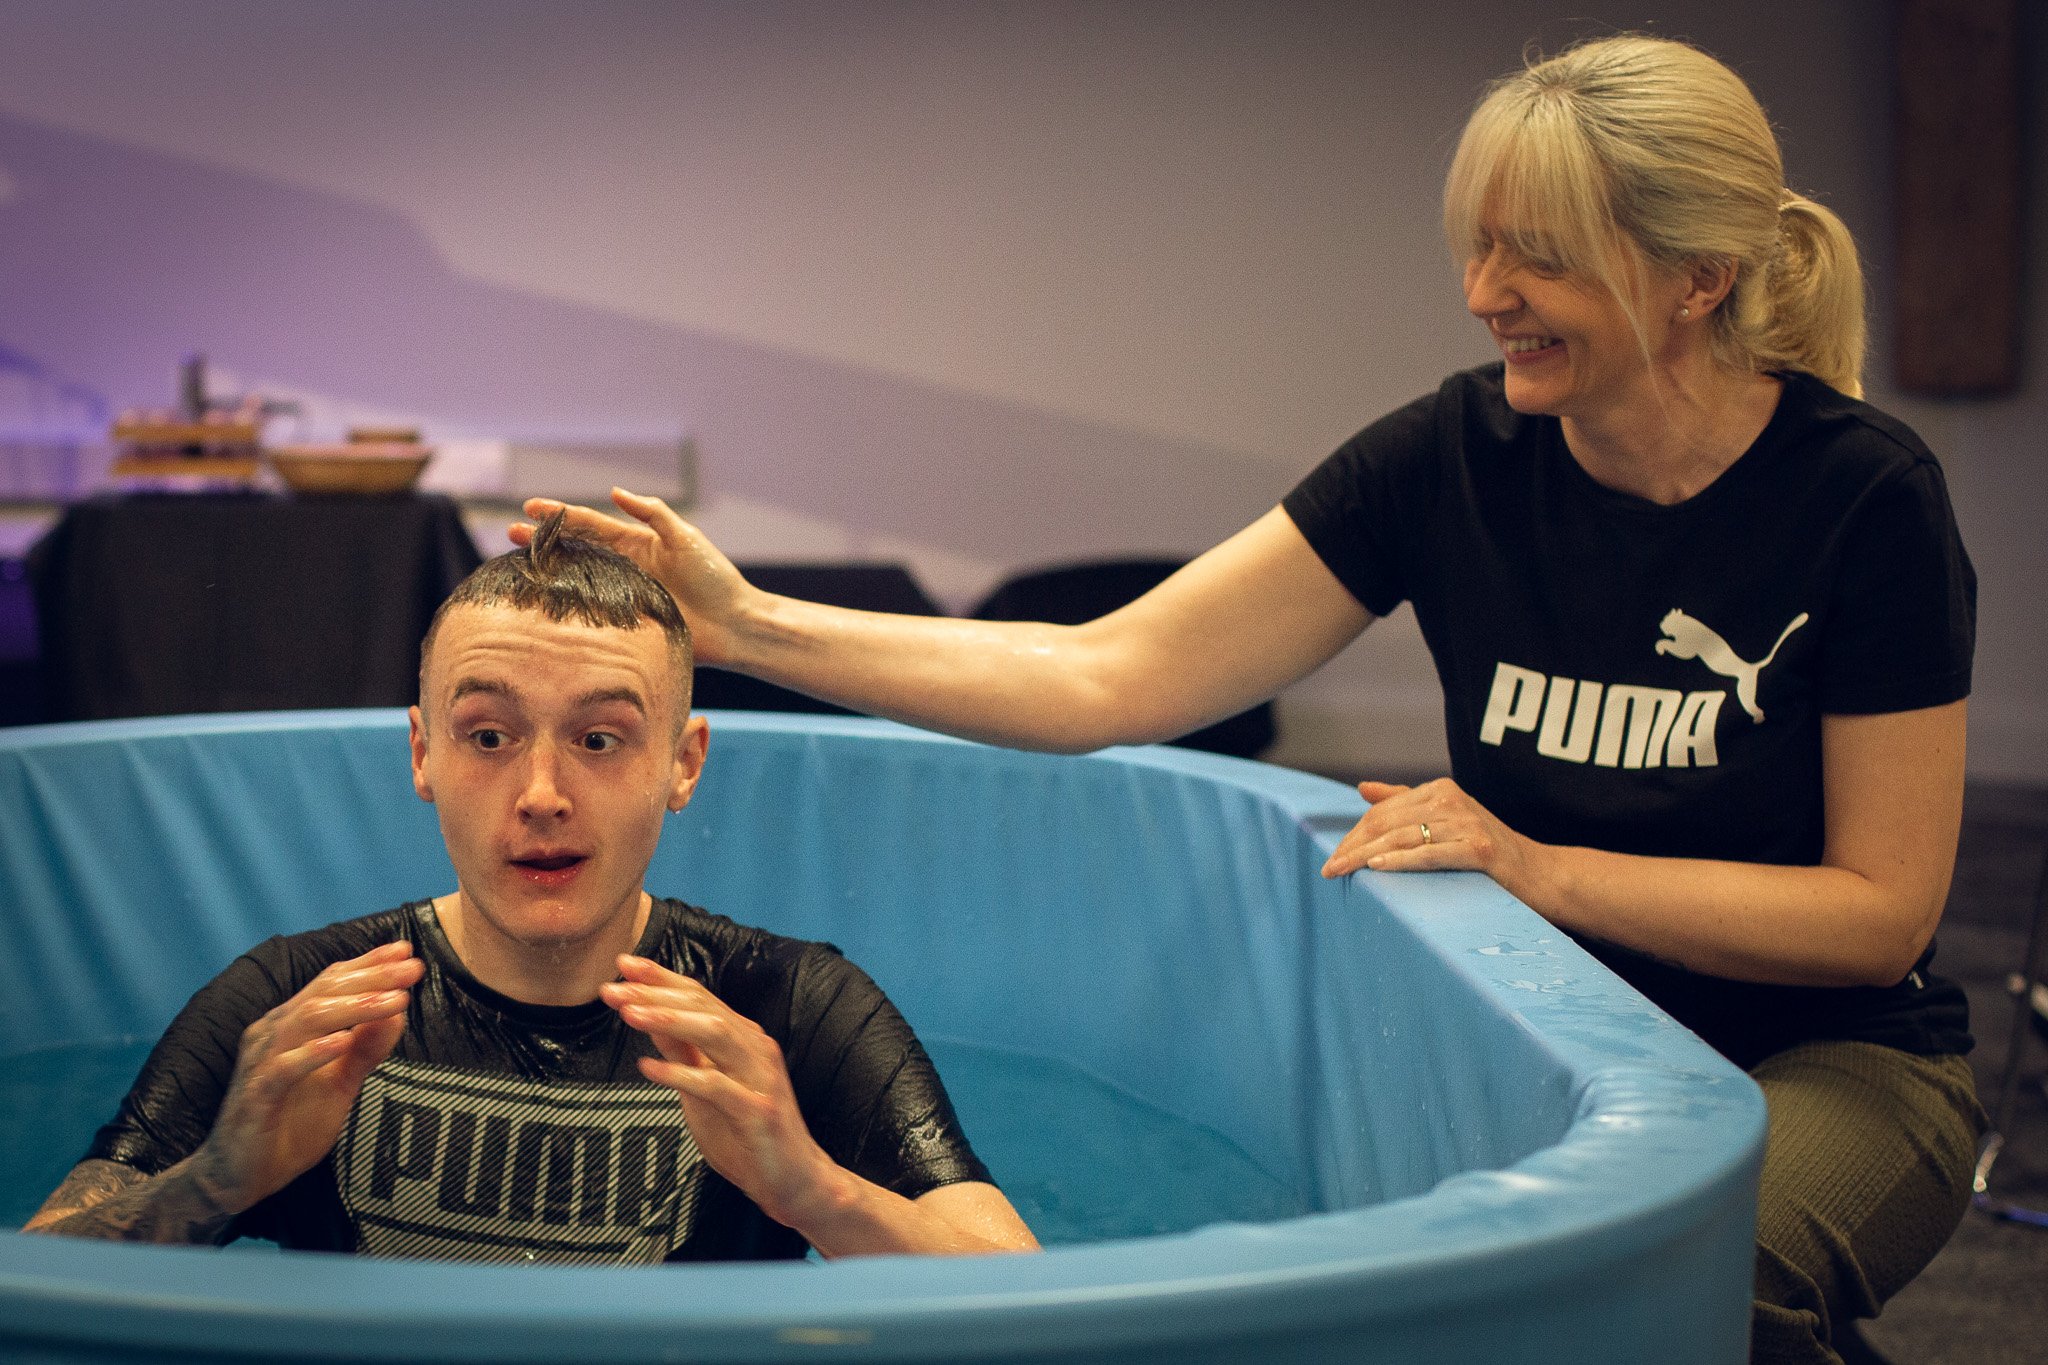 It was the first time having baptisms in our new building and Thomas, Noah and Colette all showing their love for Jesus and their commitment to follow him.